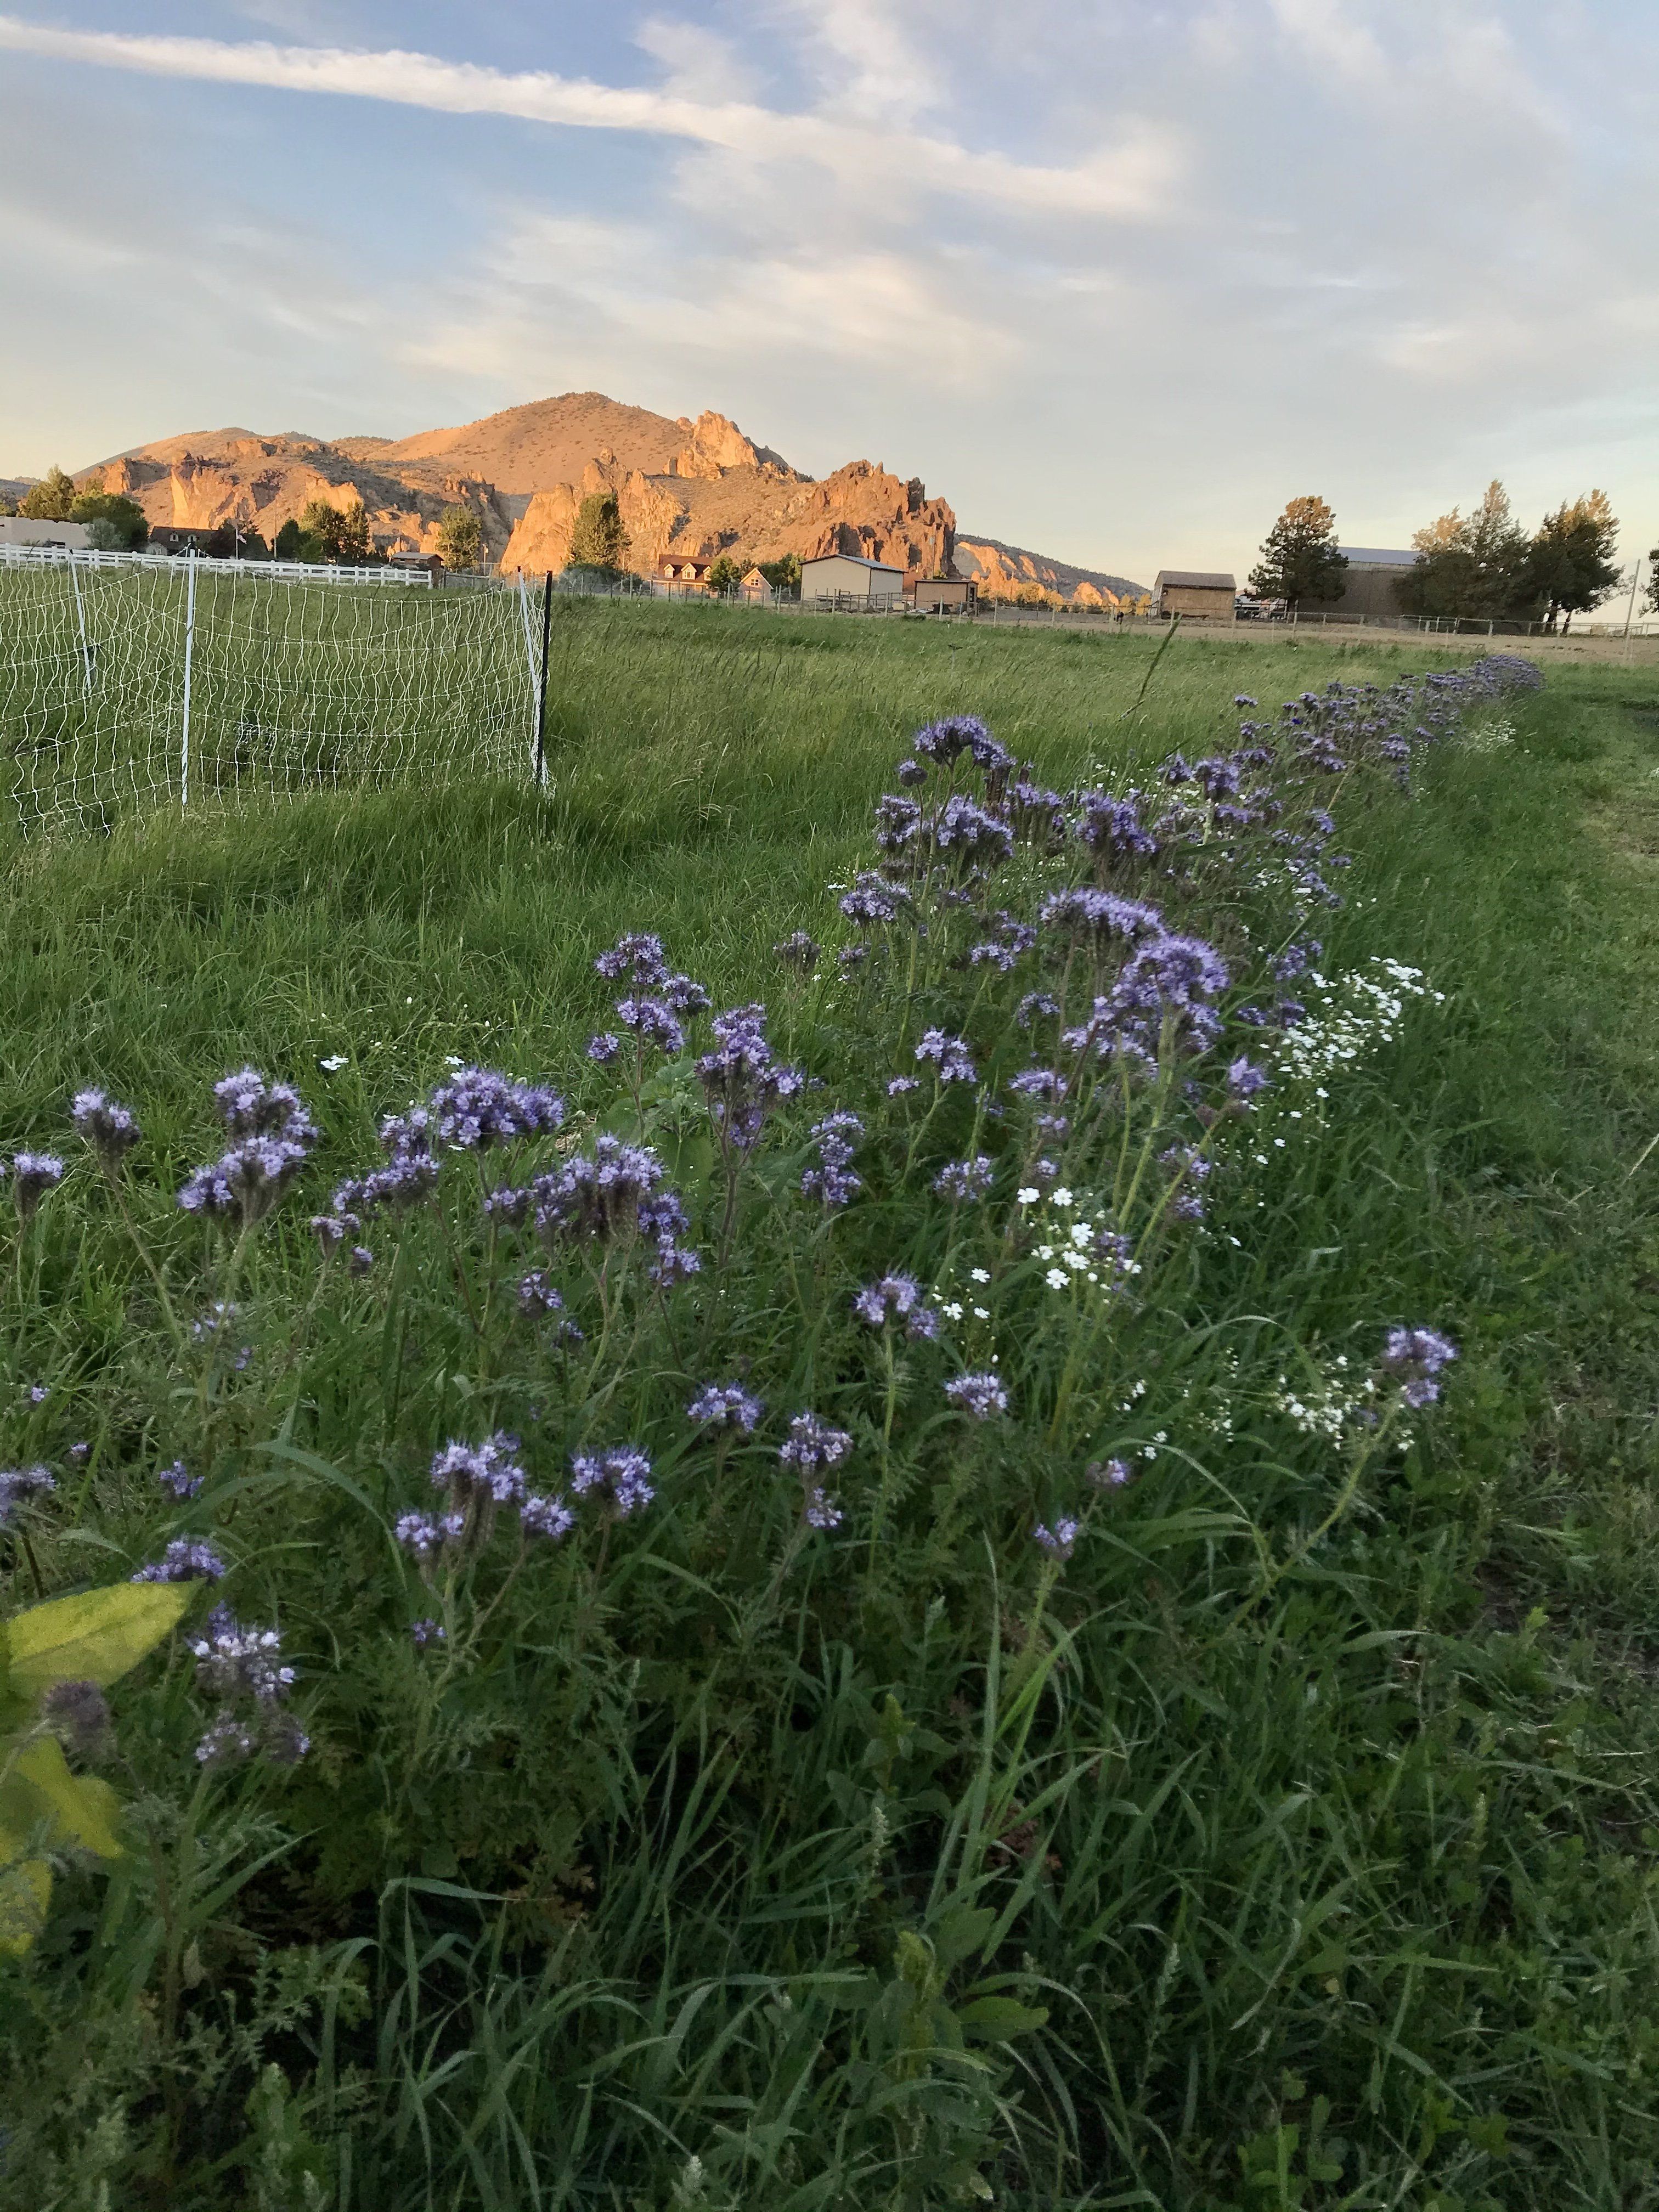 Previous Happening: Flowers on the Farm